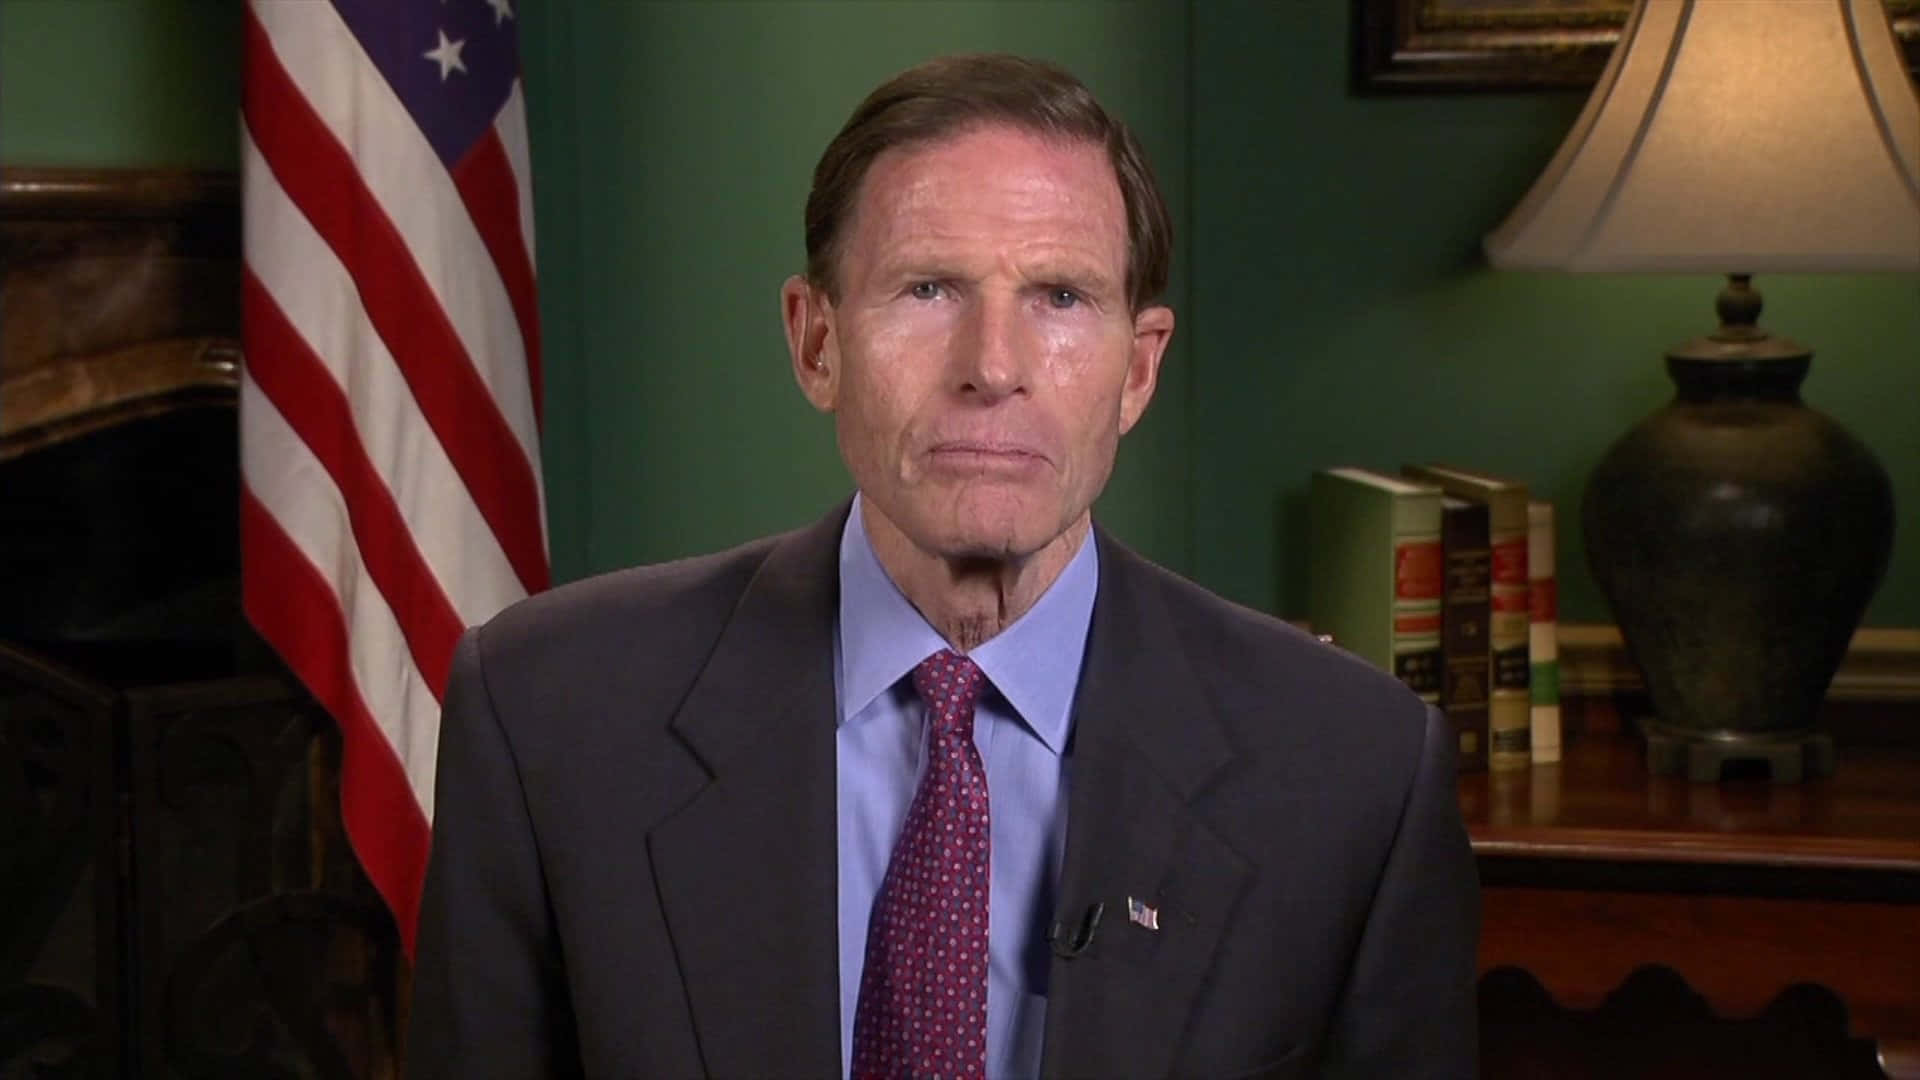 Senator Richard Blumenthal posed against a green backdrop and an American flag Wallpaper